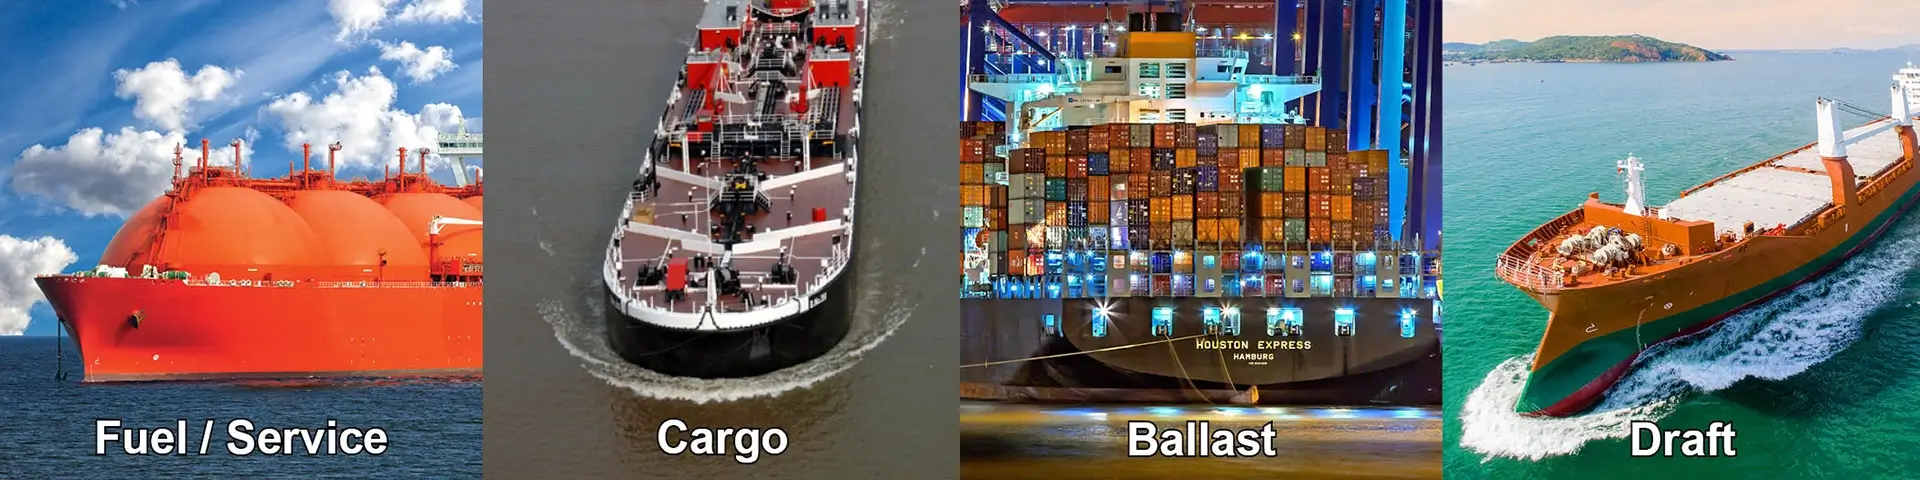 images of four cargo ships with fuel/service cargo, ballast, and draft titles underneath